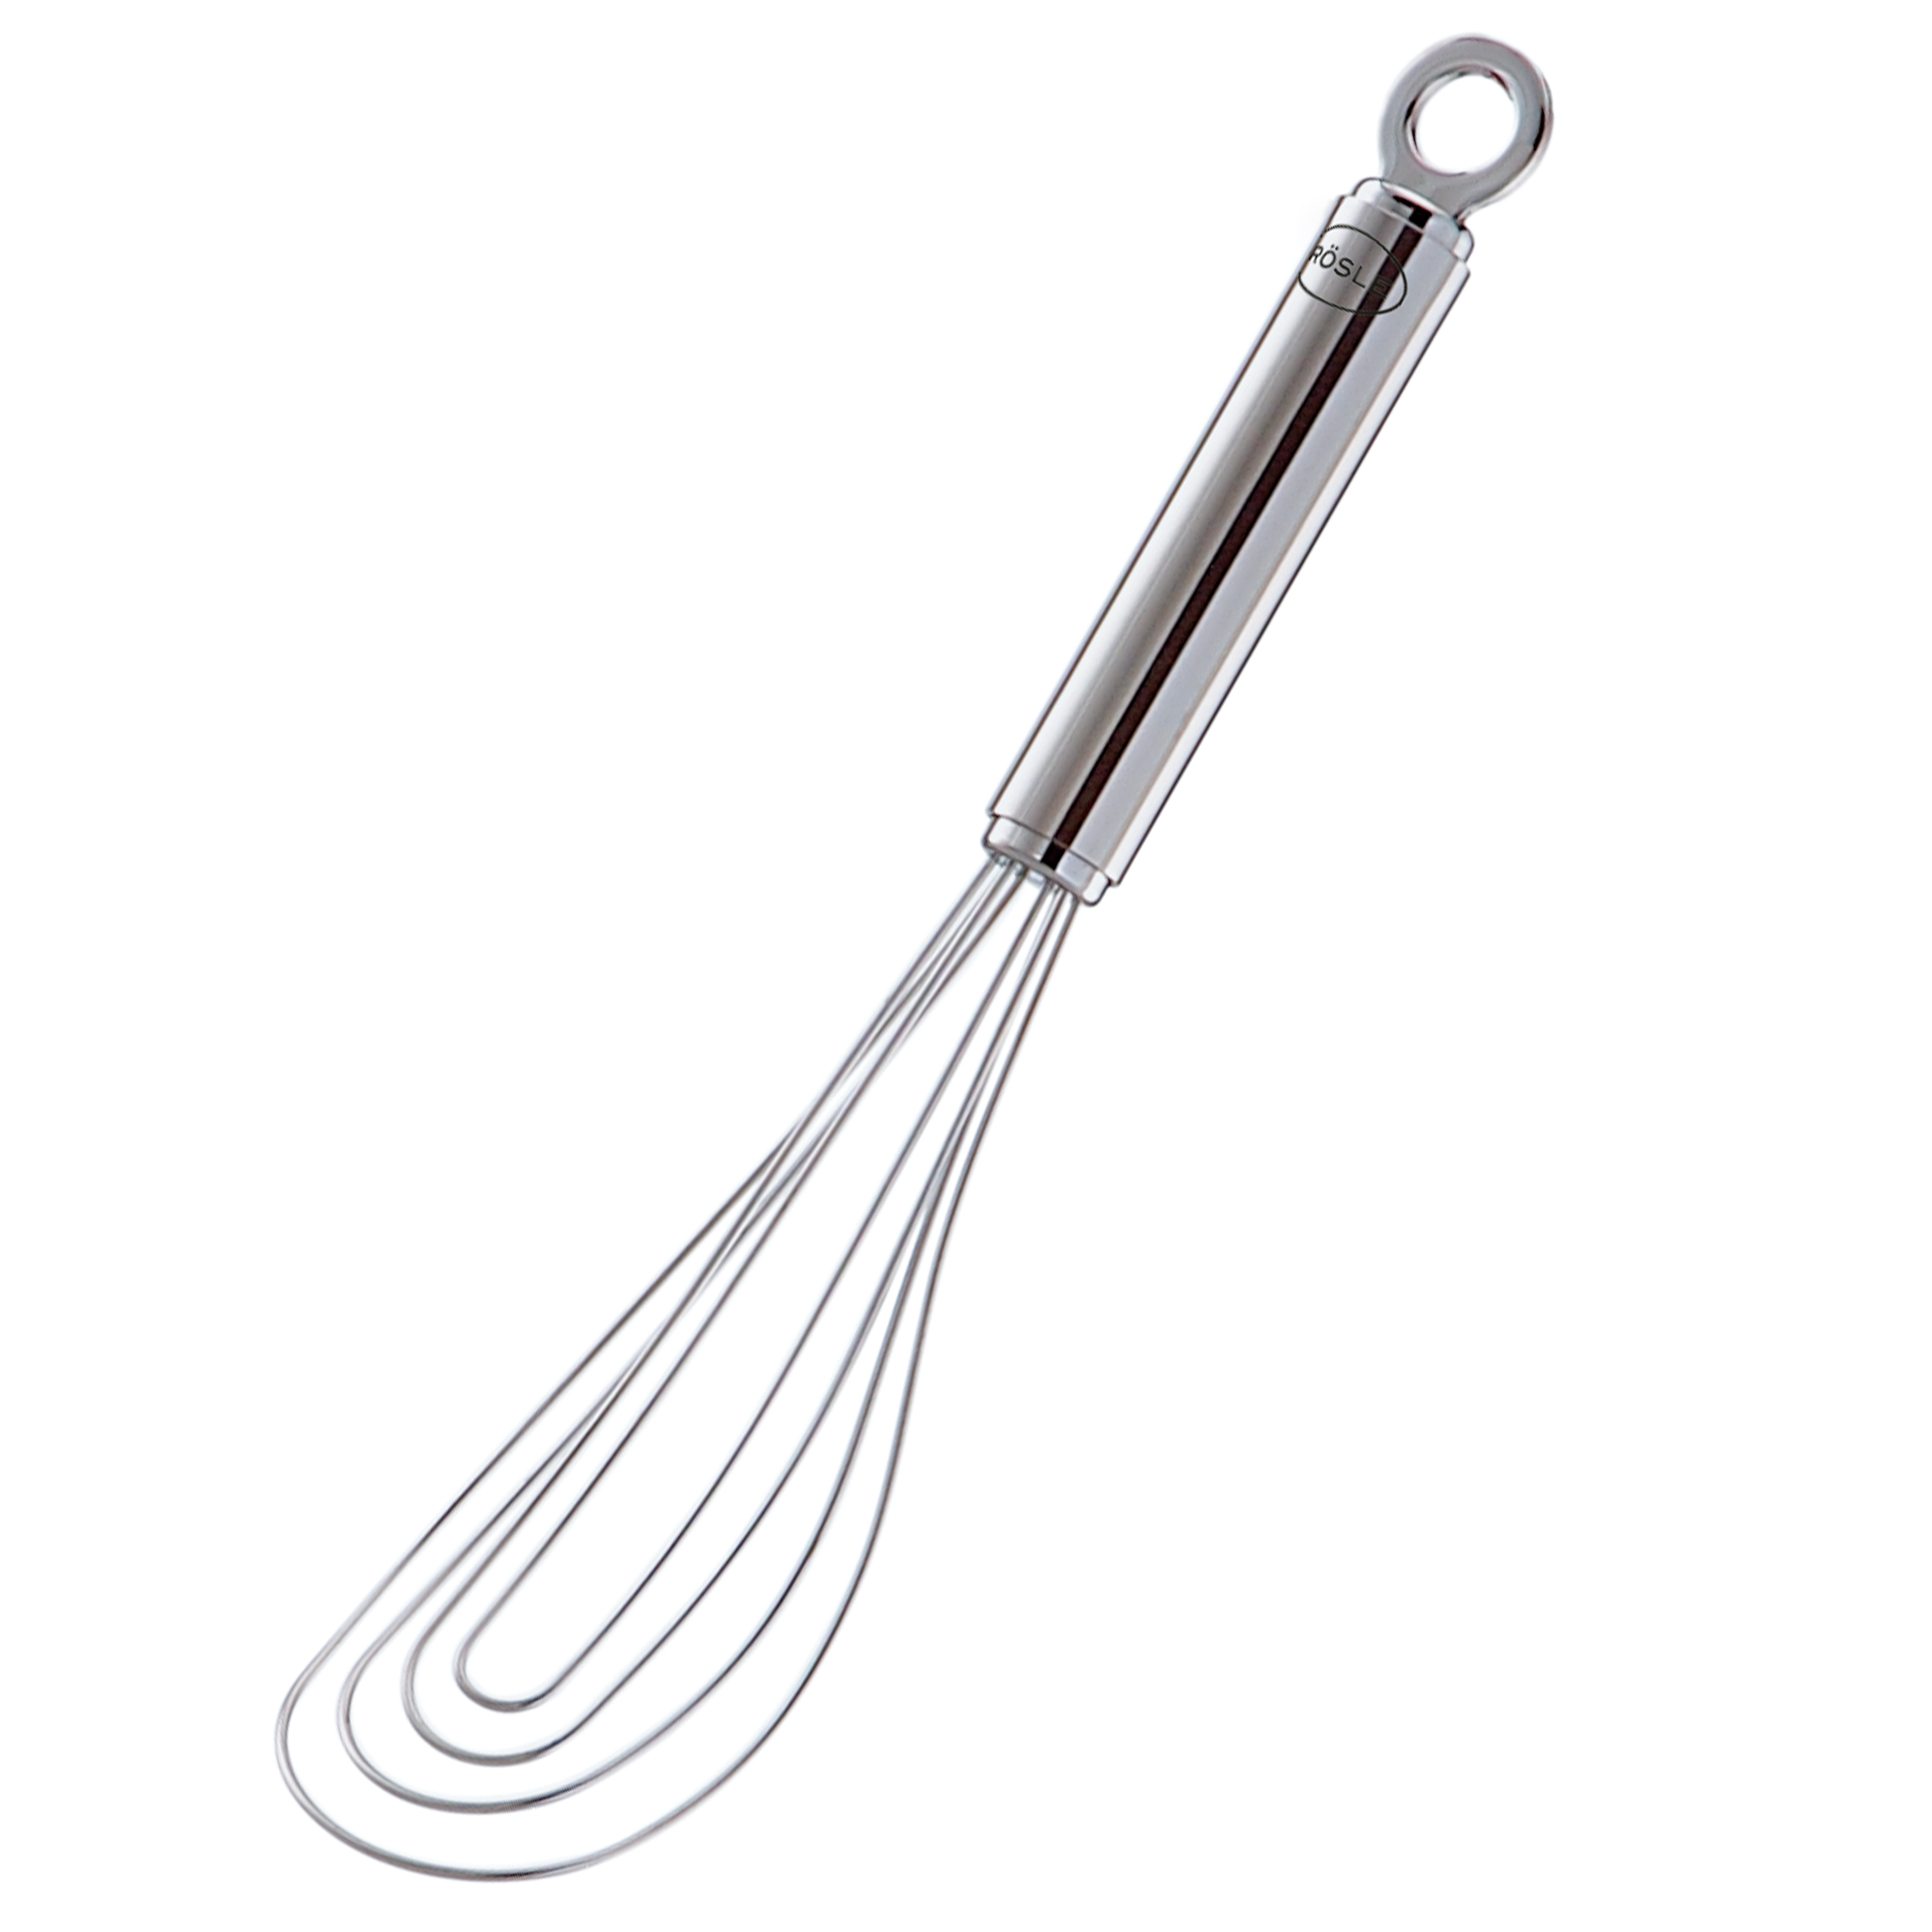 Rösle Stainless Steel & Silicone Flat Whisk, 4 Wire, 10.6-inch